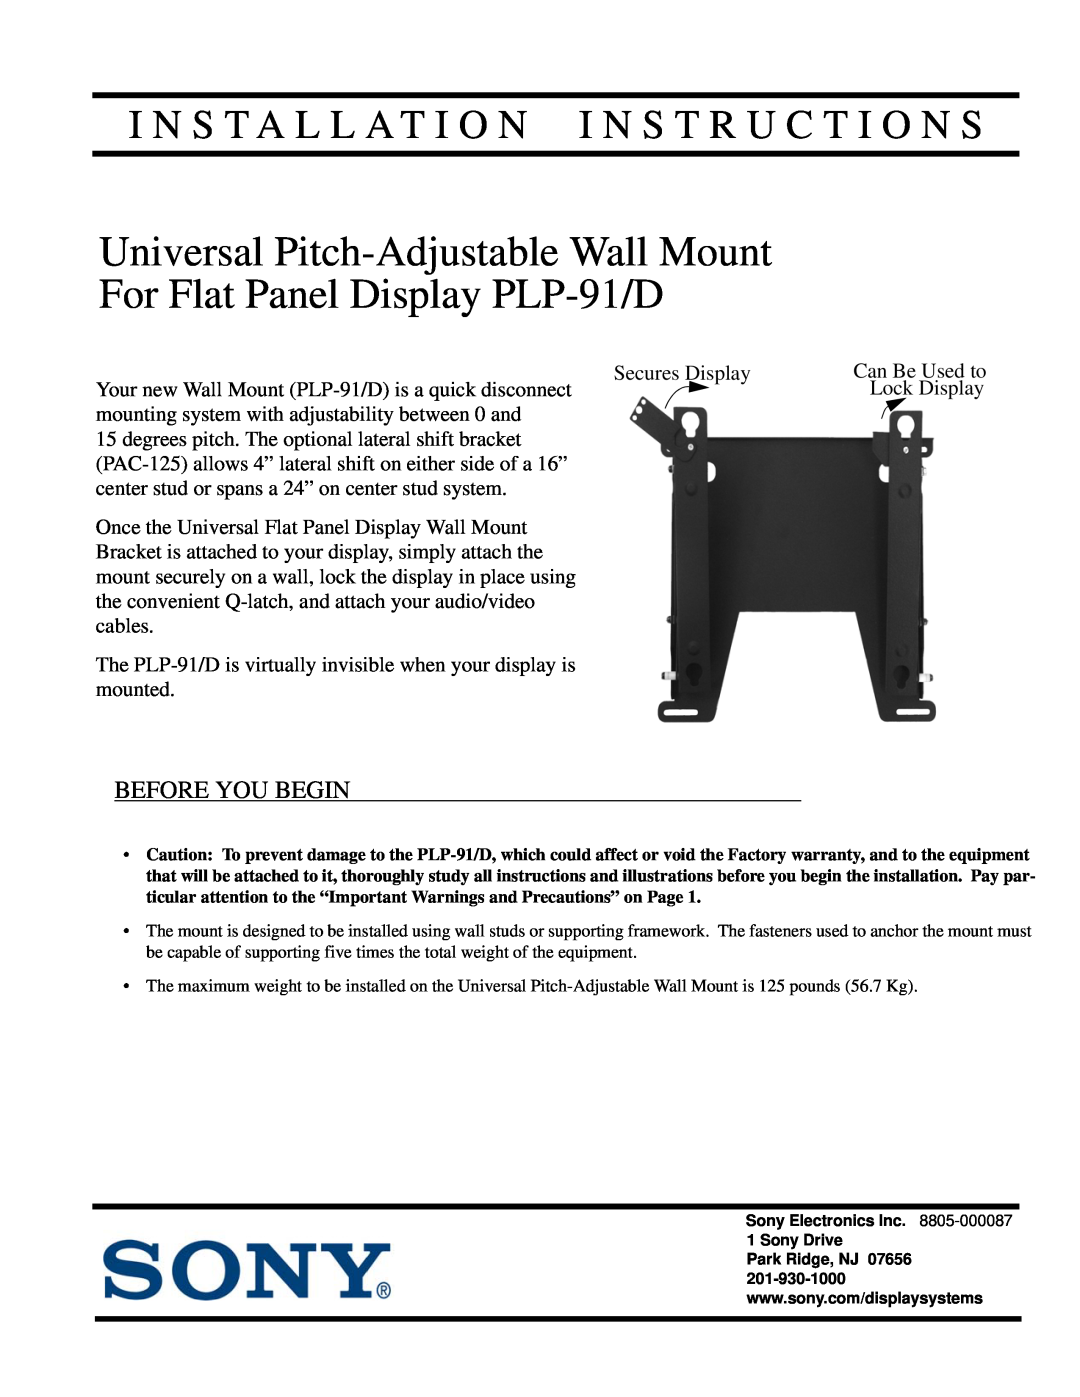 Sony installation instructions Universal Pitch-Adjustable Wall Mount For Flat Panel Display PLP-91/D, Before You Begin 